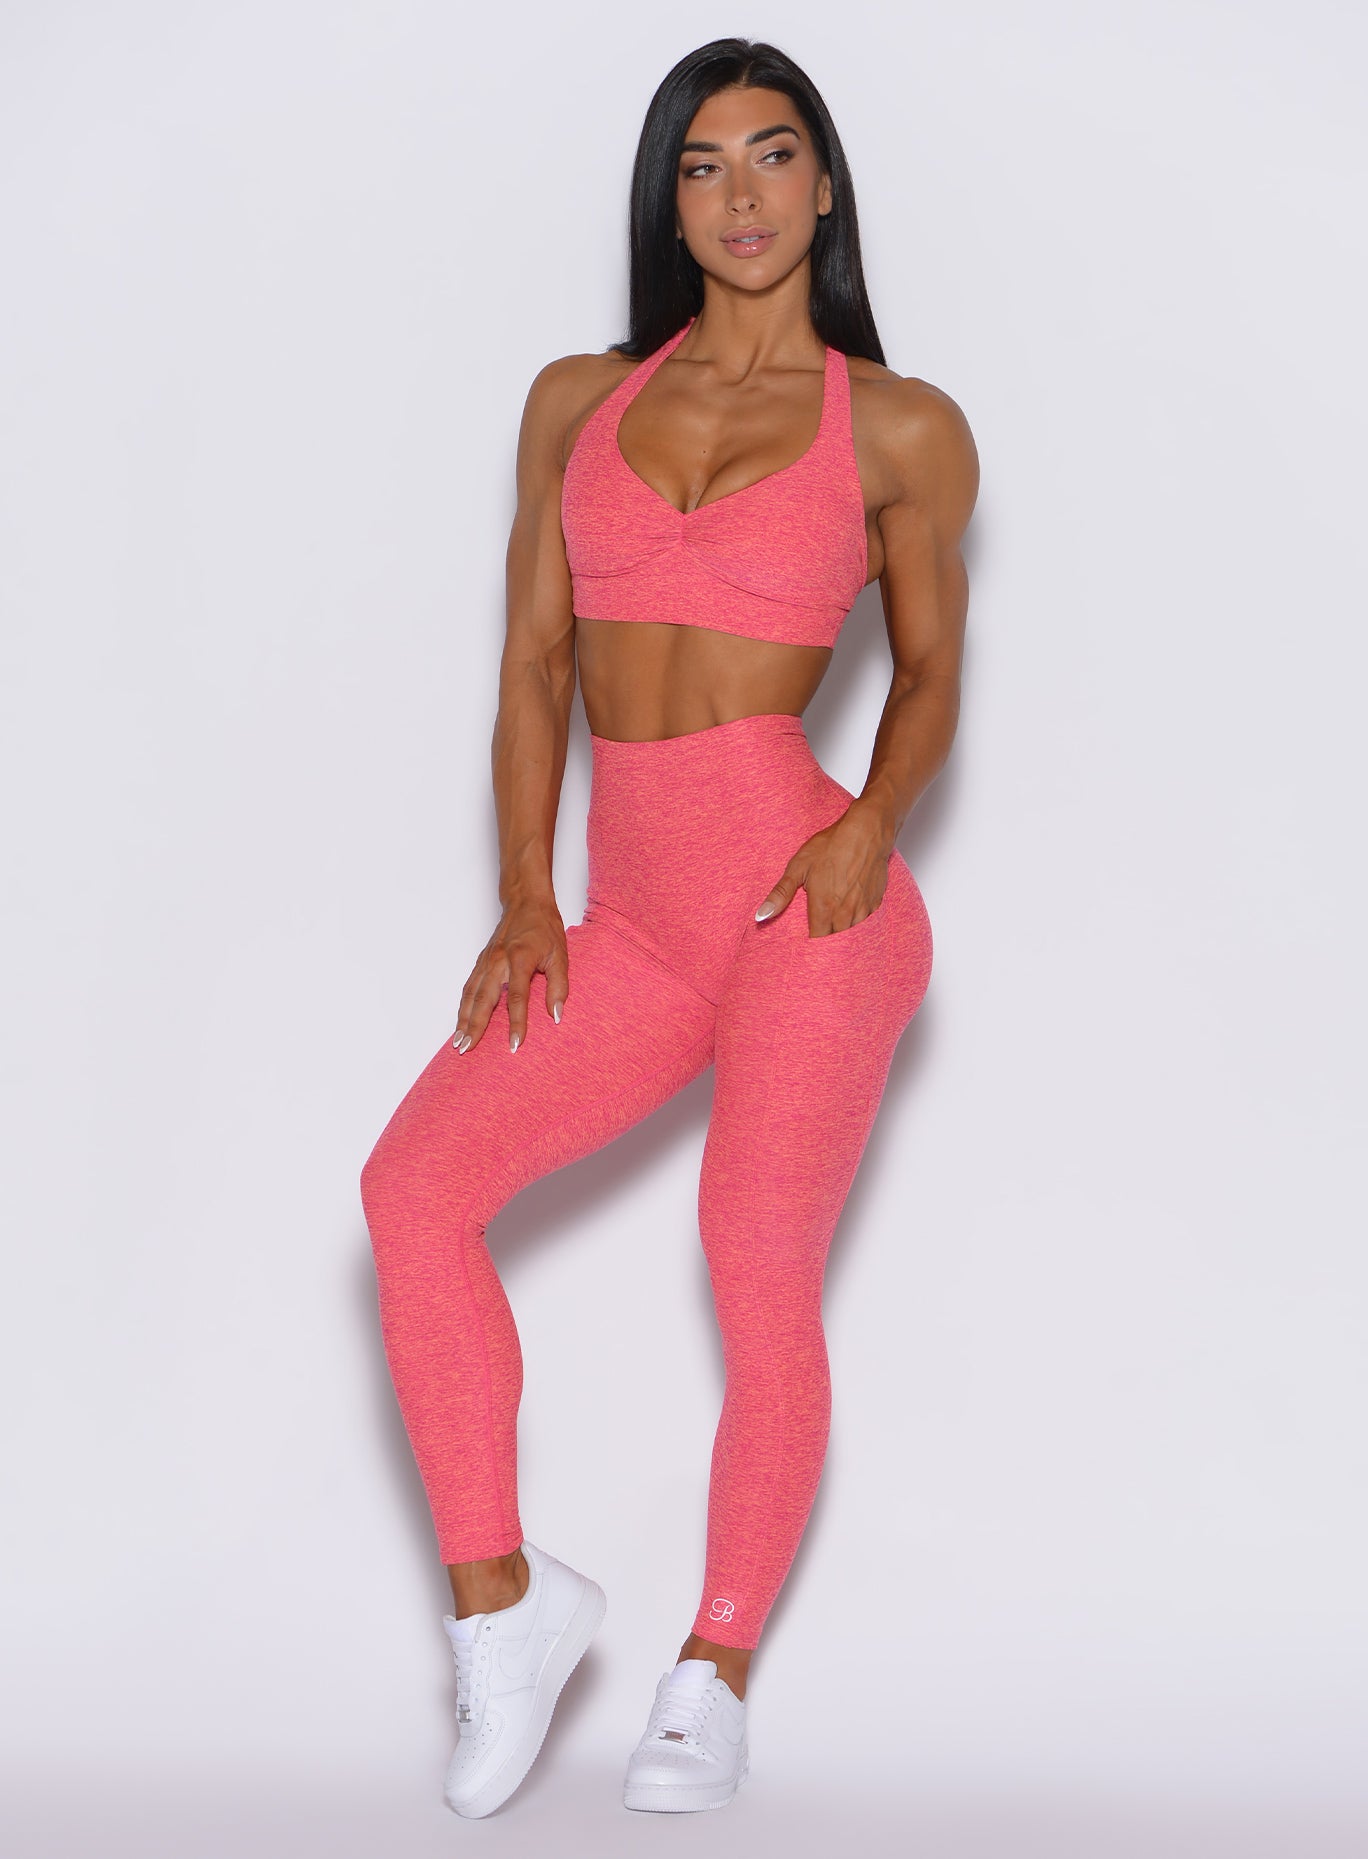 front profile view of a model wearing our V back leggings in Neon Tangerine Shock color along with a matching bra   